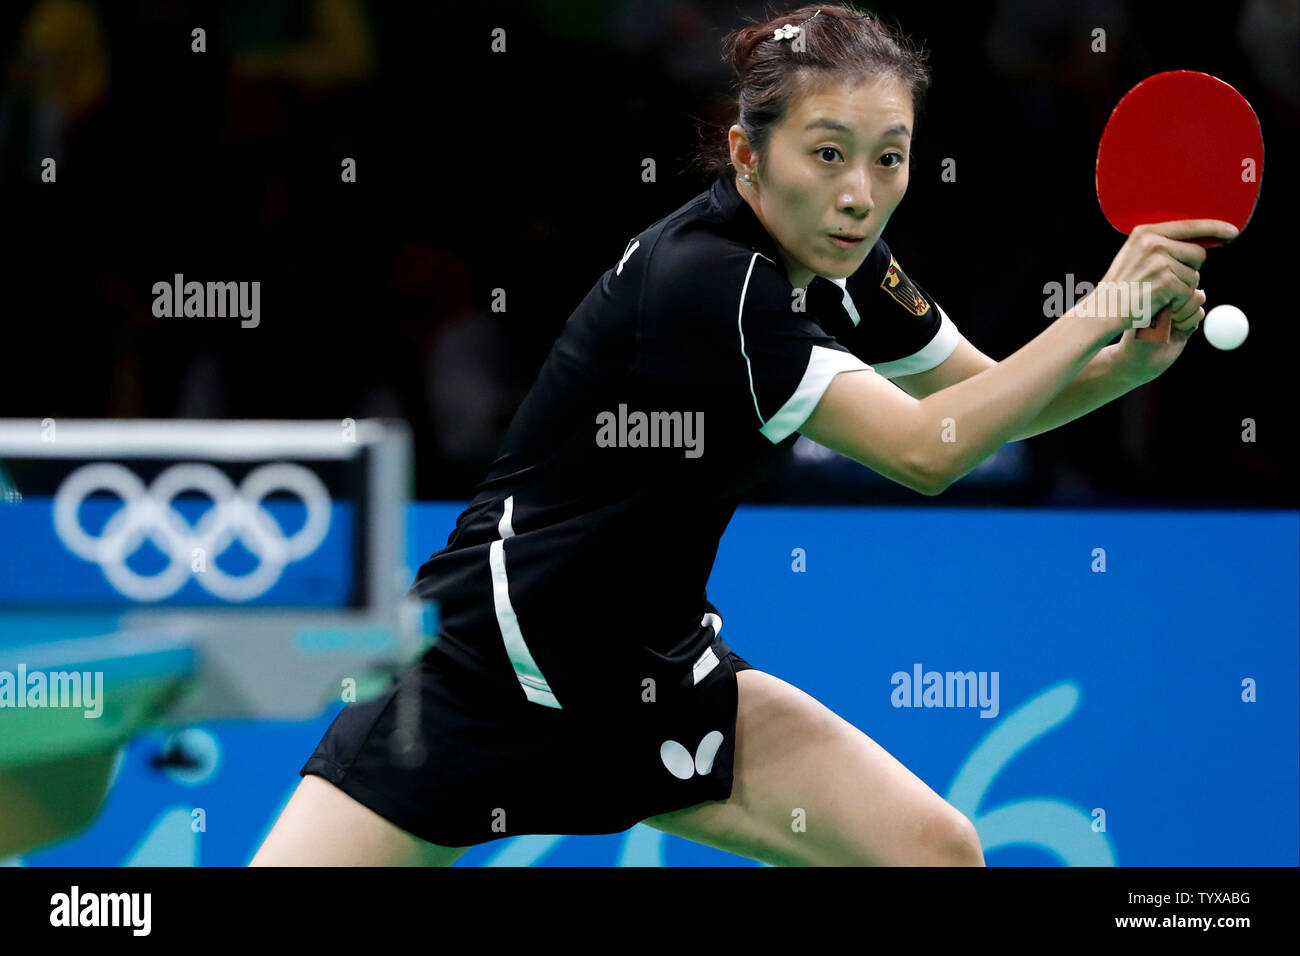 GermanyÕs Ying Han stretches for the ball in the Women's Team Table Tennis gold medal match against ChinaÕs Xiaoxia Li in Riocentro Pavilion 3 at the 2016 Rio Summer Olympics in Rio de Janeiro, Brazil, on August 16, 2016.   Photo by Matthew Healey/UPI Stock Photo